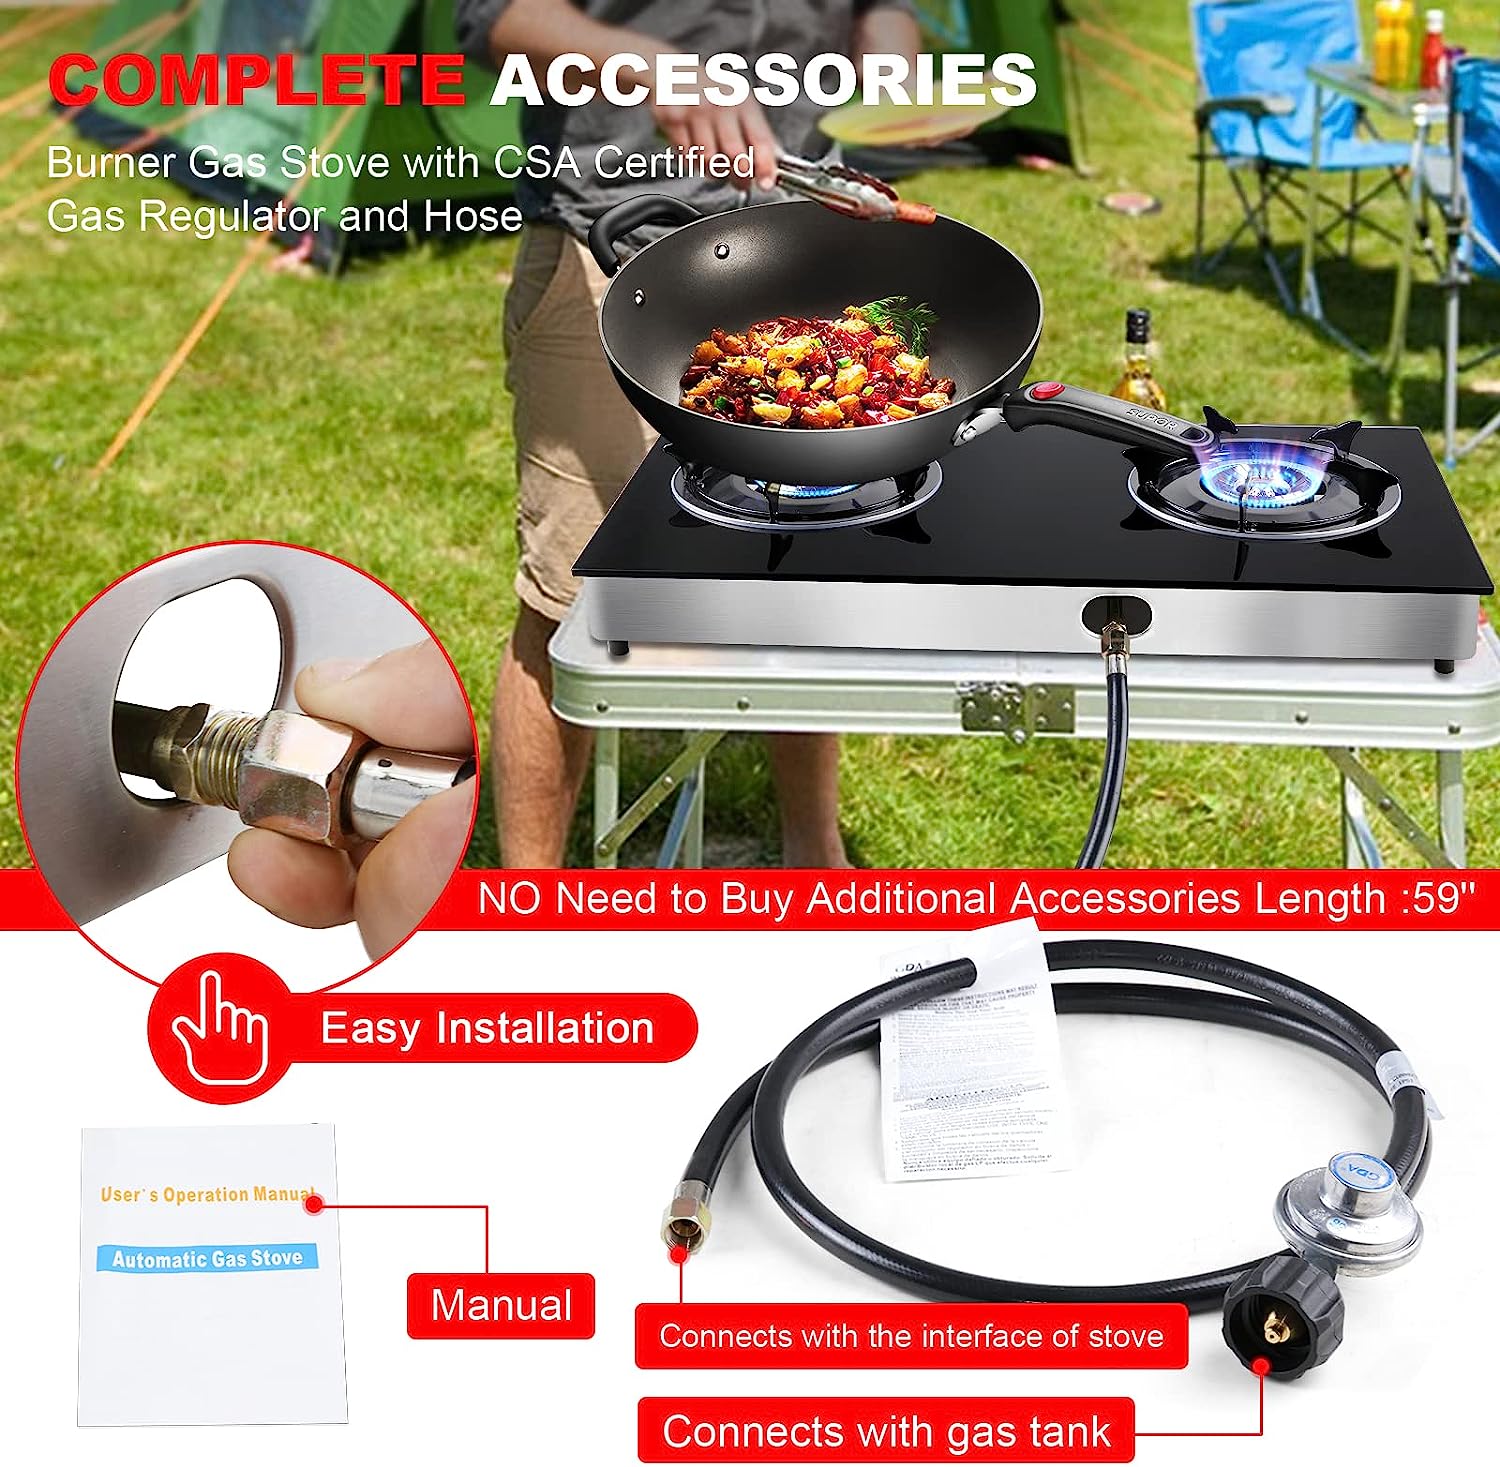 https://discounttoday.net/wp-content/uploads/2023/06/Forimo-Propane-Gas-Cooktop-2-Burners-Stove-portable-gas-stove-Tempered-Glass-Double-Auto-Ignition-Camping-Burner-LPG-for-RV-Apartments-Outdoor-5.jpg